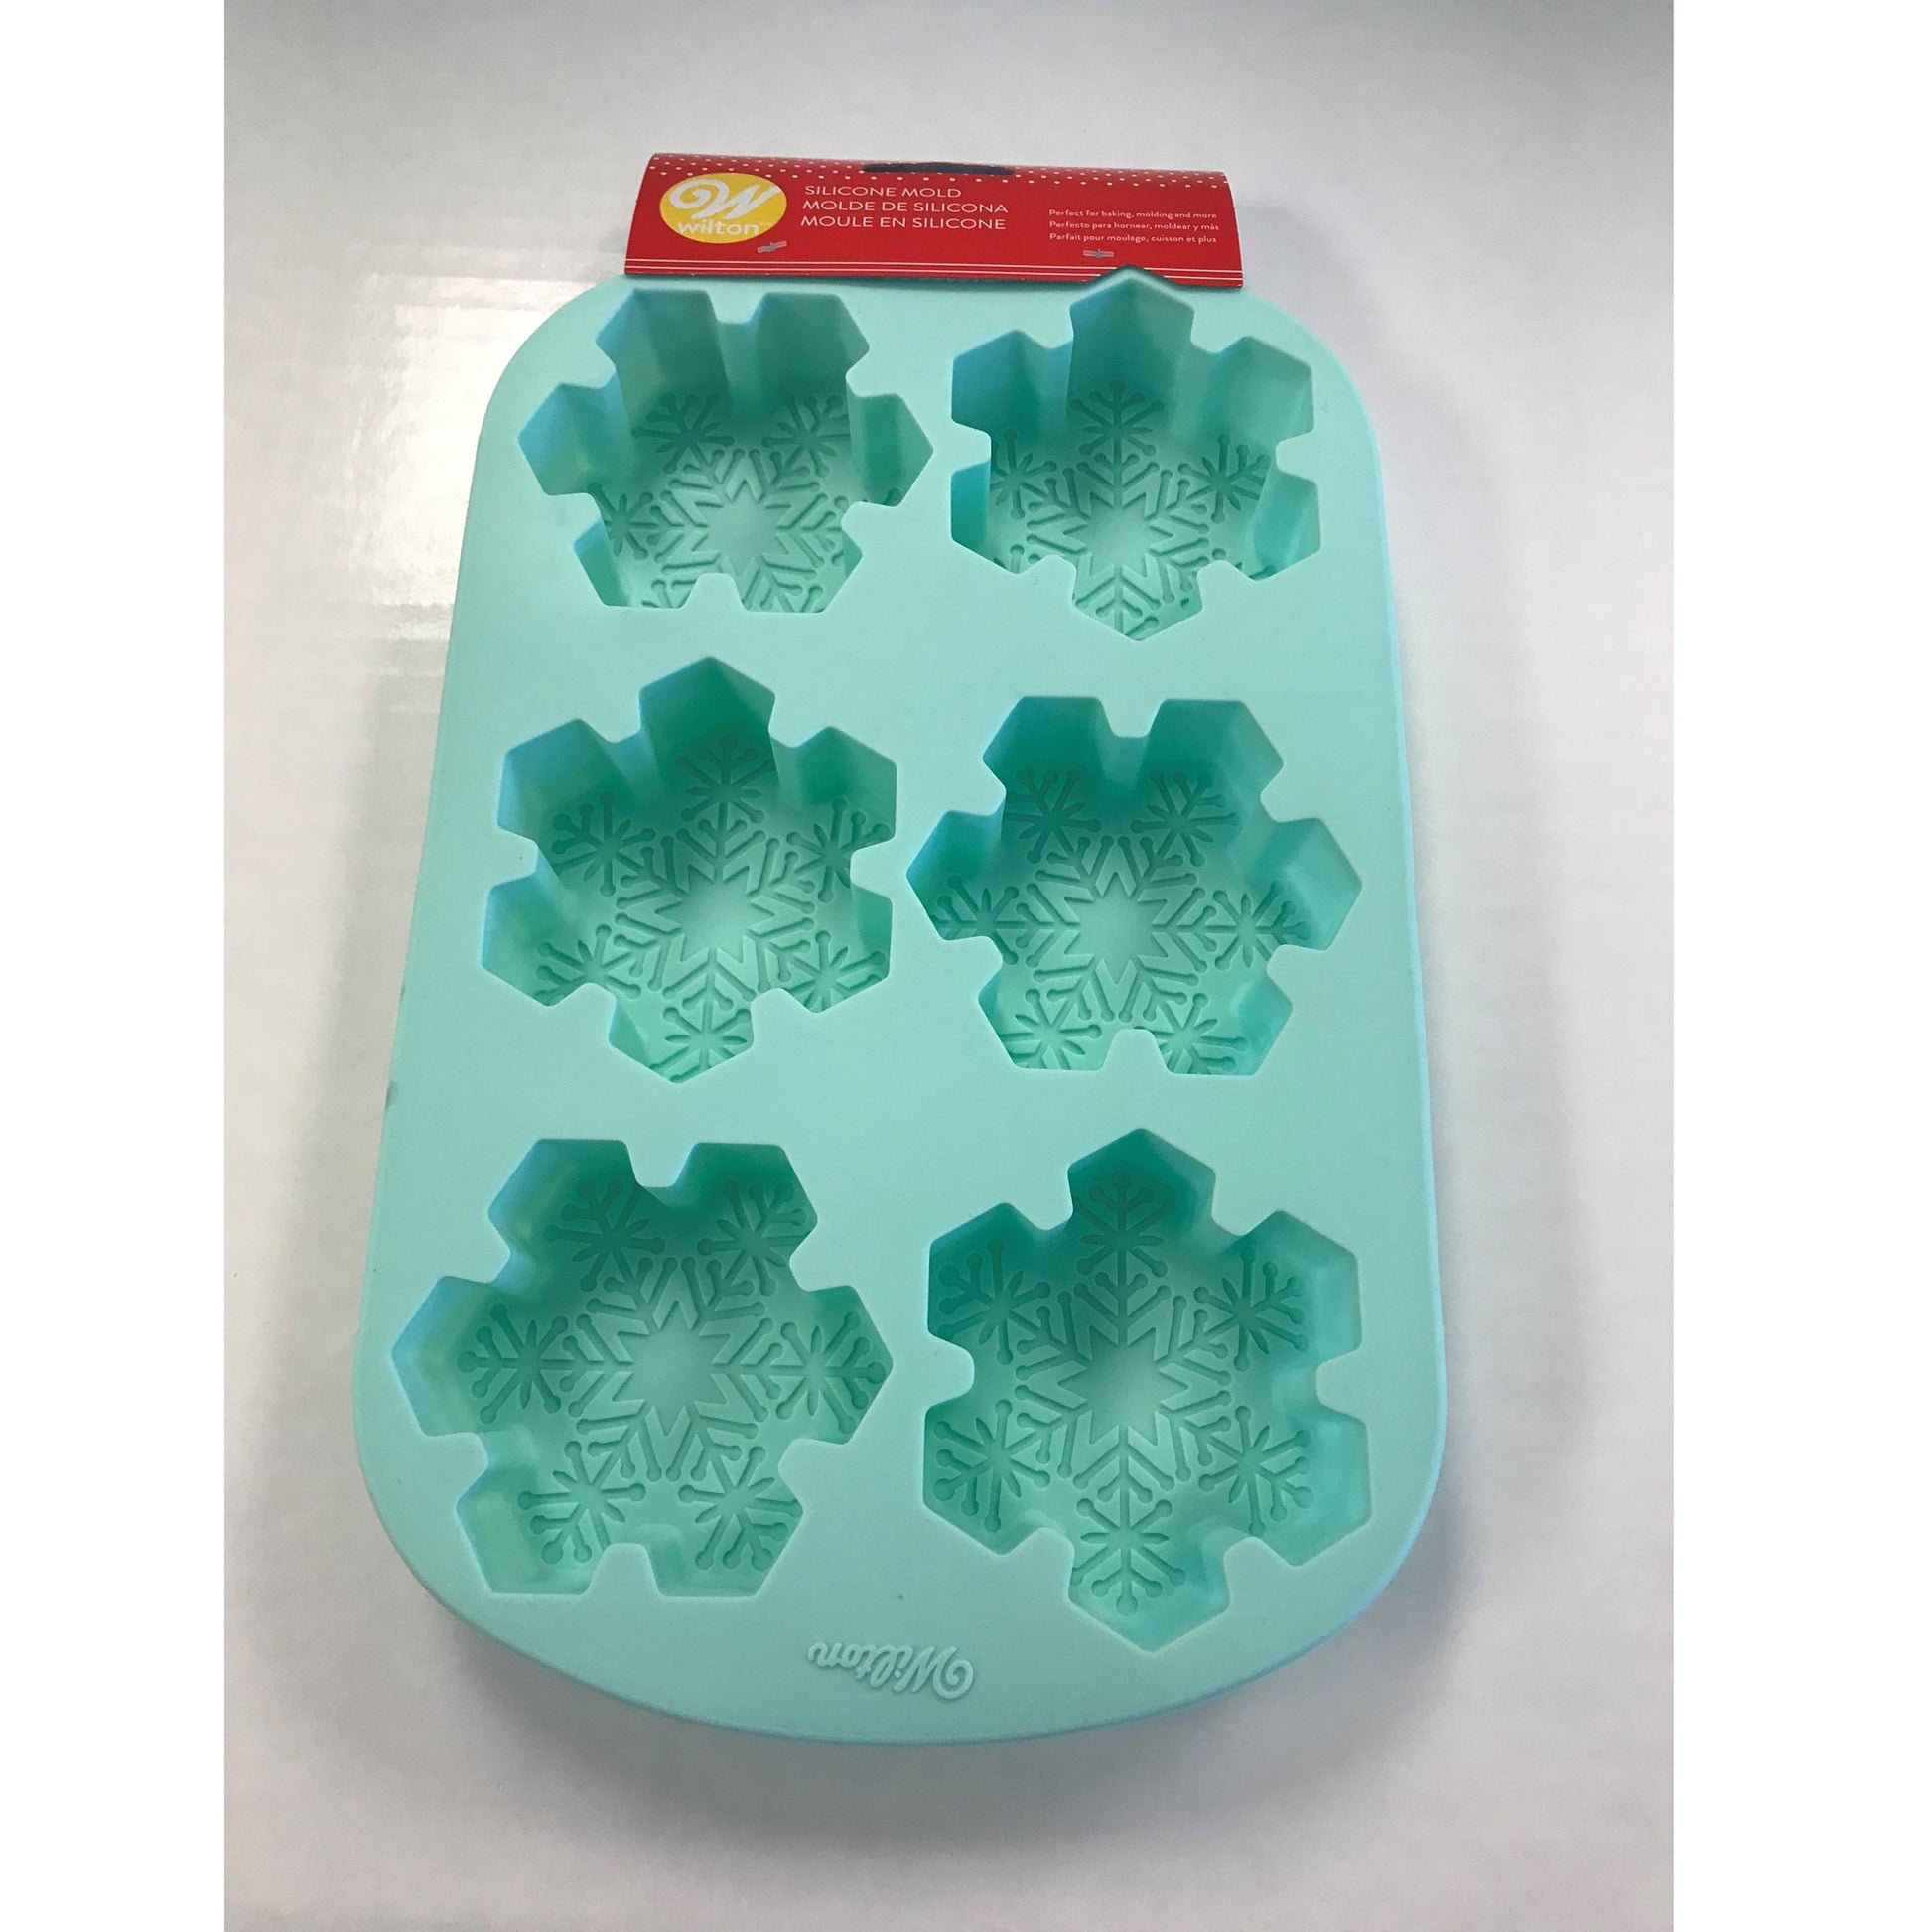 Blue Silicone Snowflake Mold with 6 Cavities